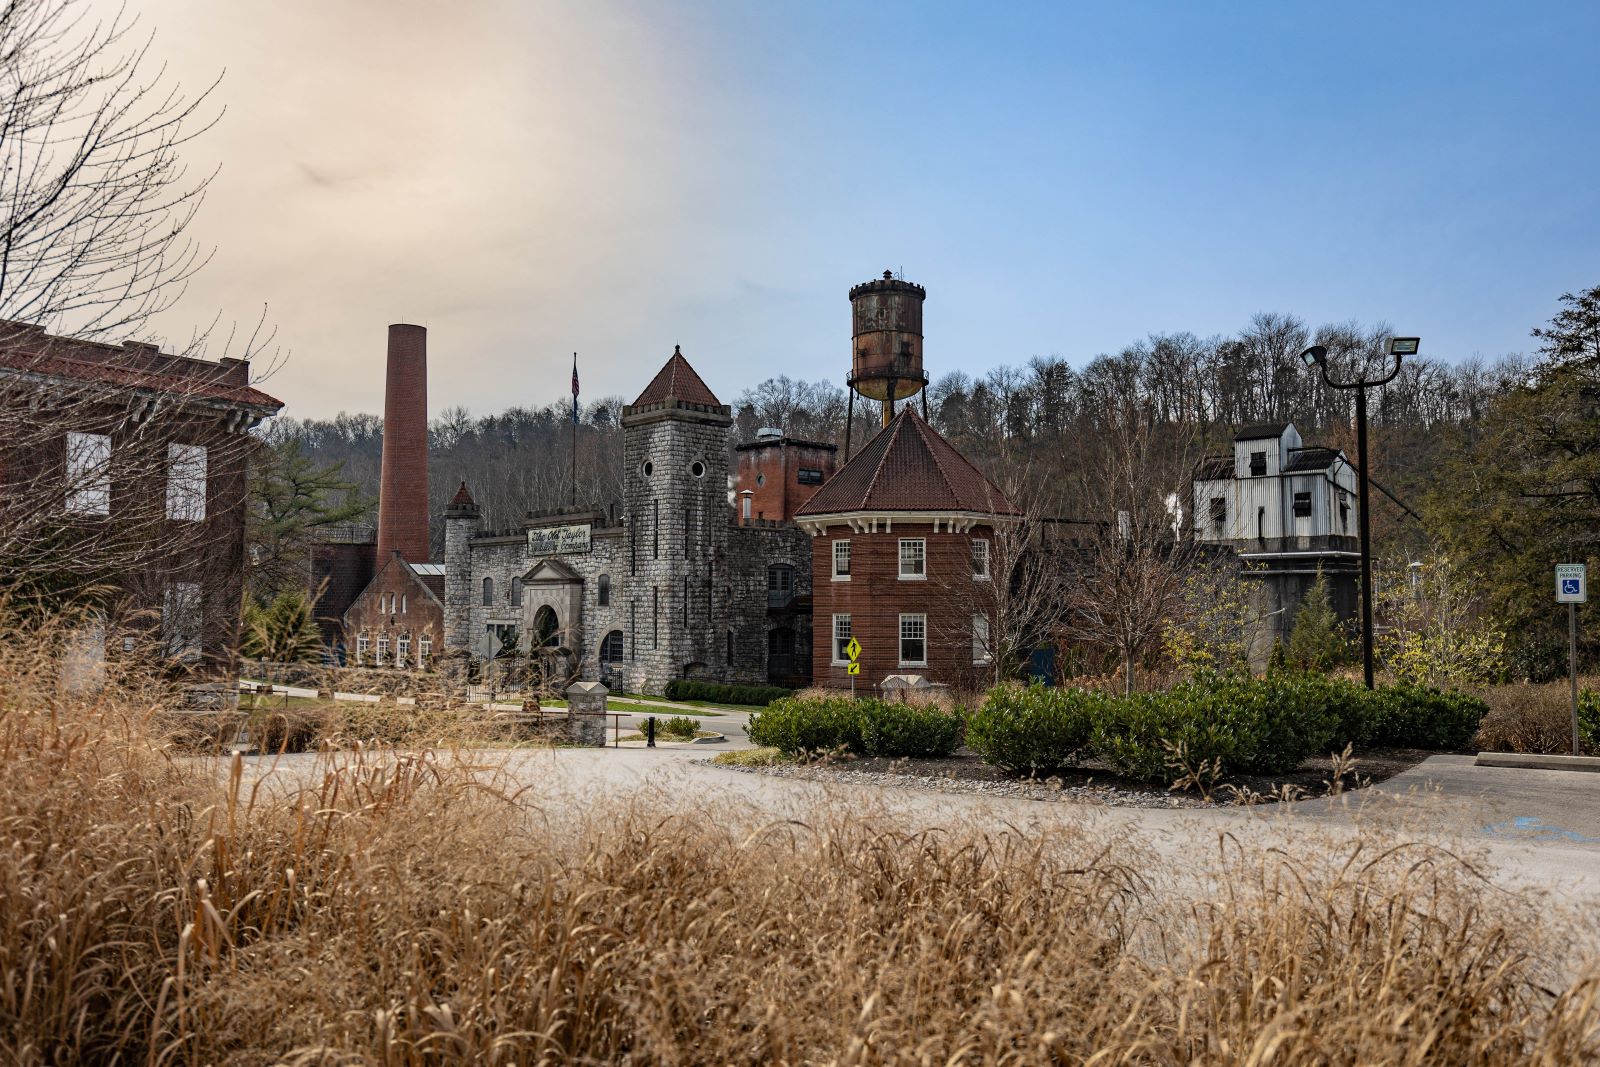 <p class="wp-caption-text">Image Credit: Shutterstock / Ivelin Denev</p>  <p>Tour the birthplace of bourbon, visiting historic distilleries and picturesque countryside. It’s a must for whiskey aficionados.</p>